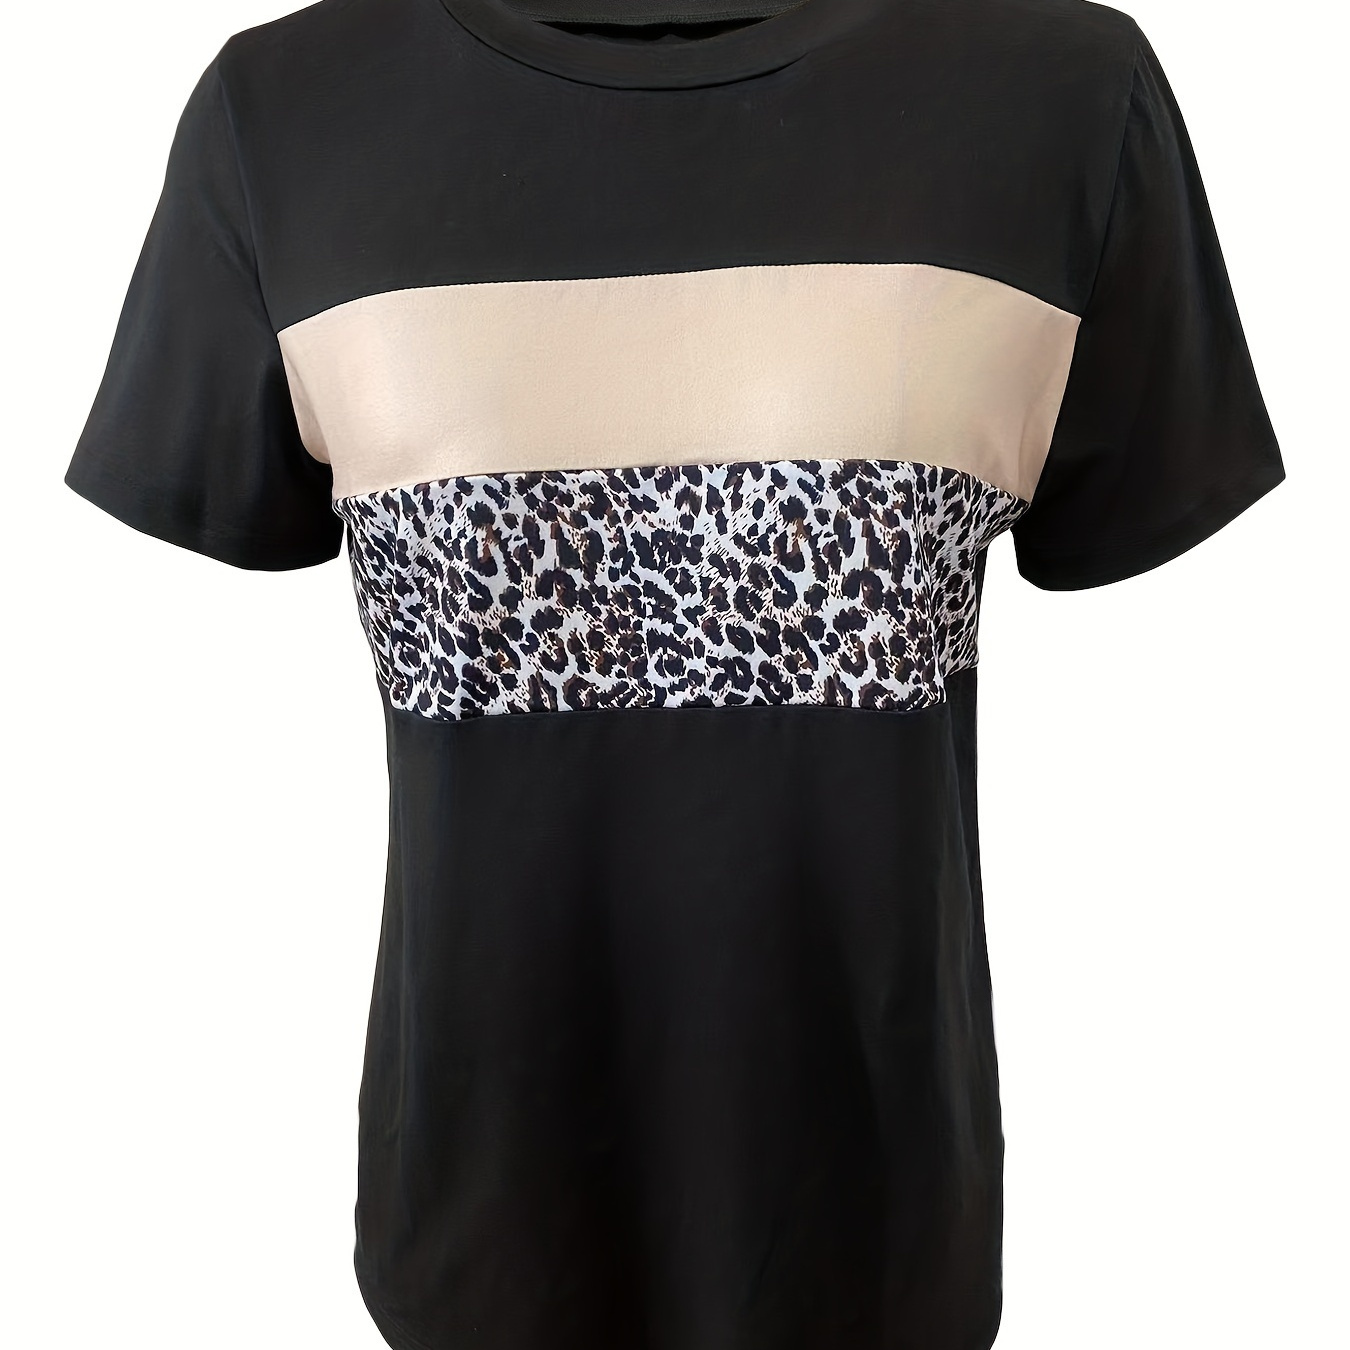 

Leopard Print Colorblock Crew Neck T-shirt, Casual Short Sleeve Top For Spring & Summer, Women's Clothing